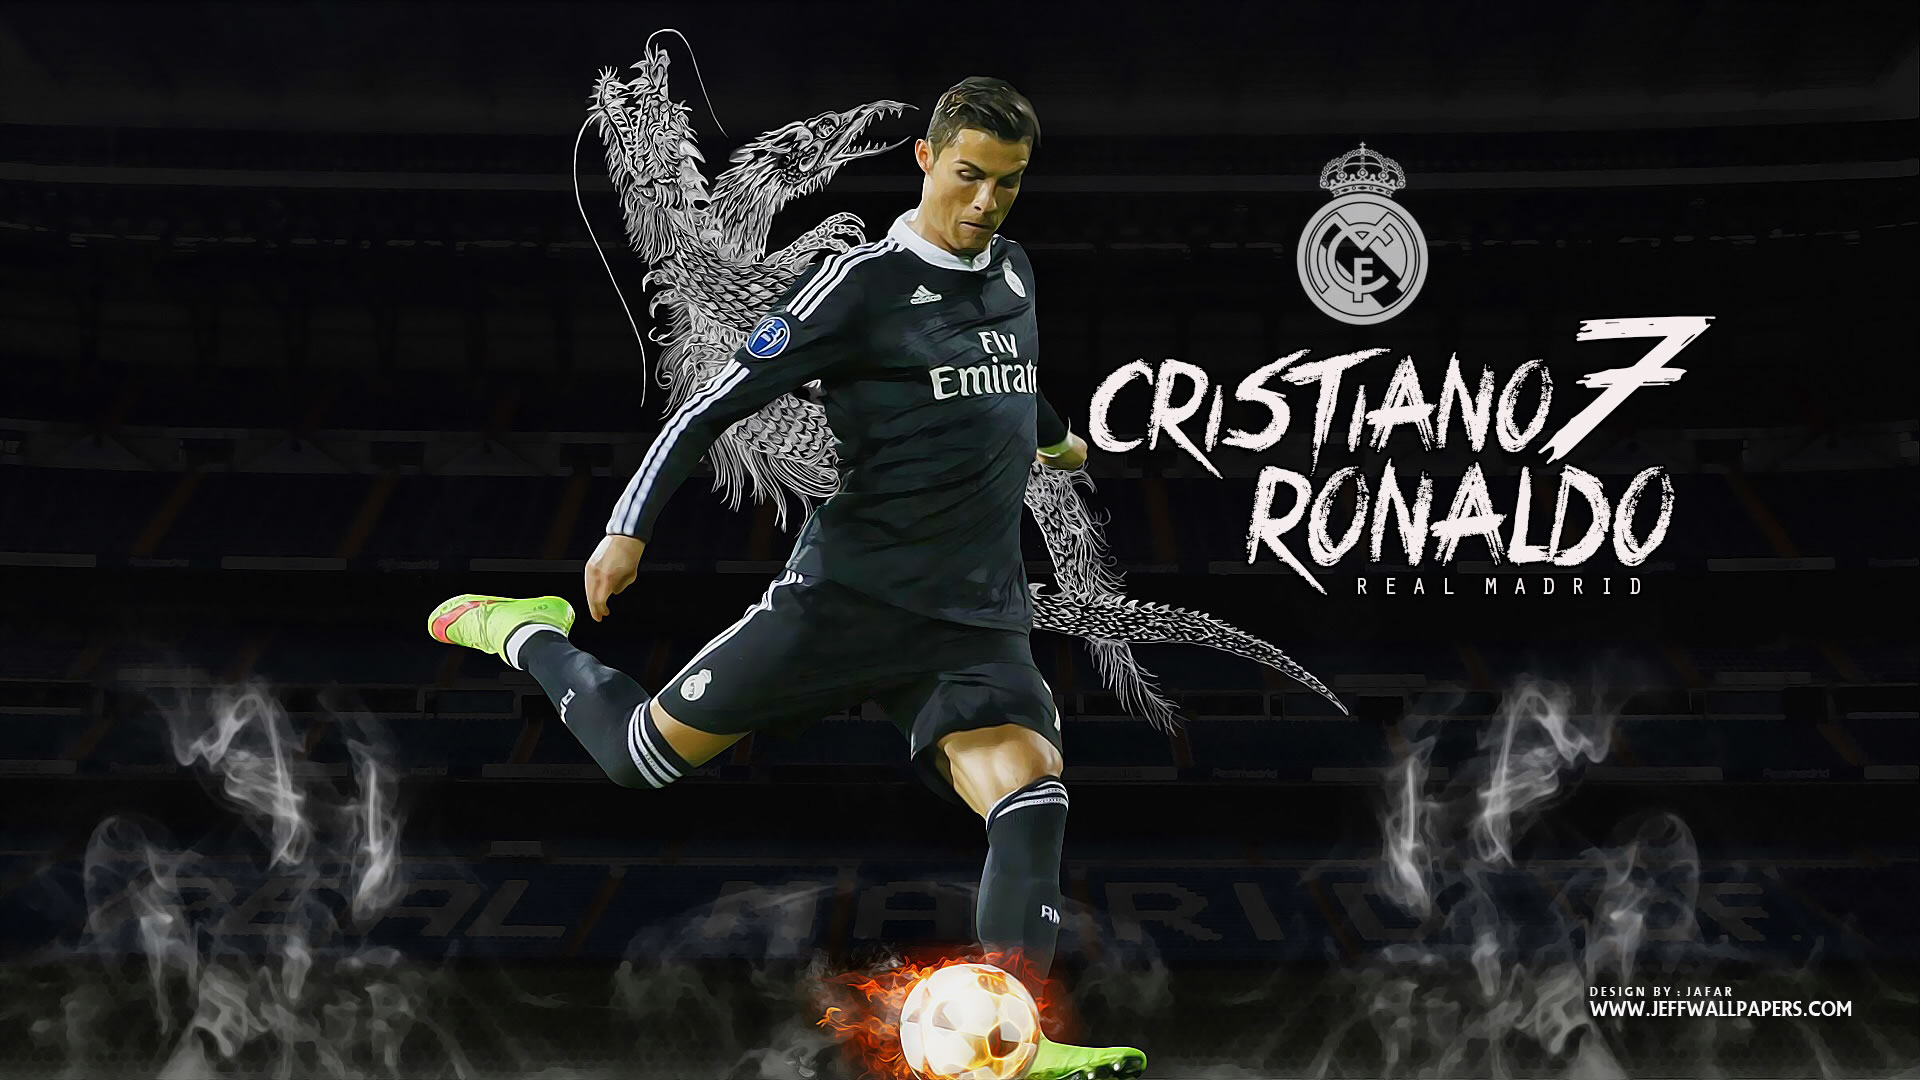 Cristiano Ronaldo Real Madrid Poster Pictures To